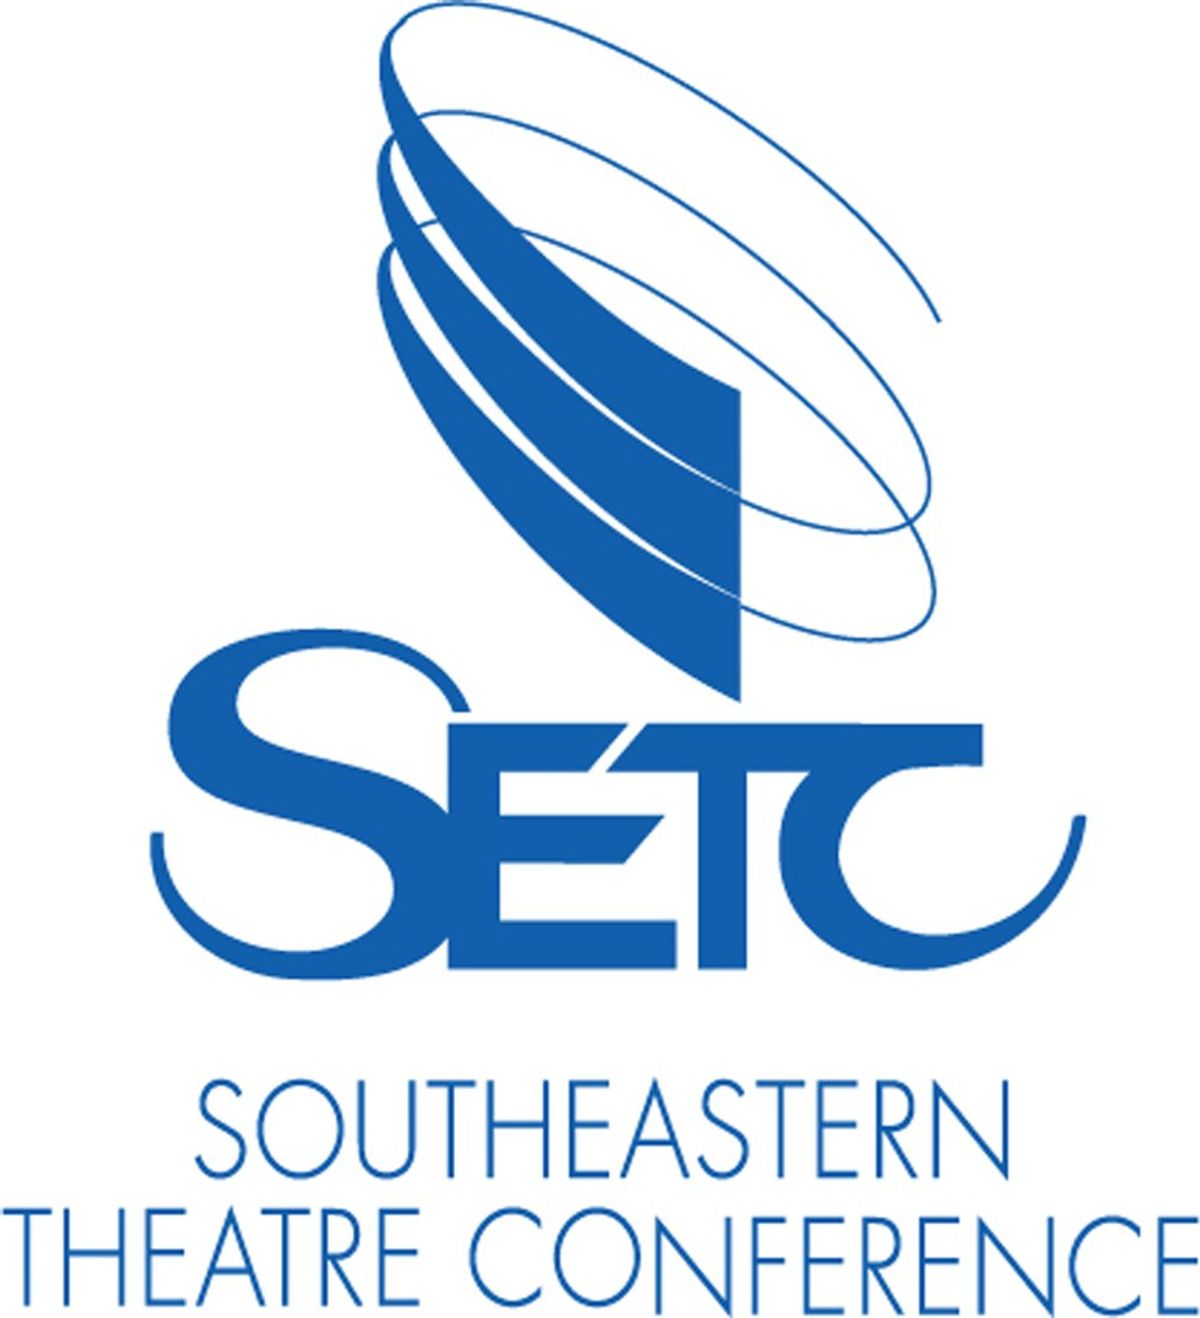 Why The Southeastern Theatre Conference Is Important